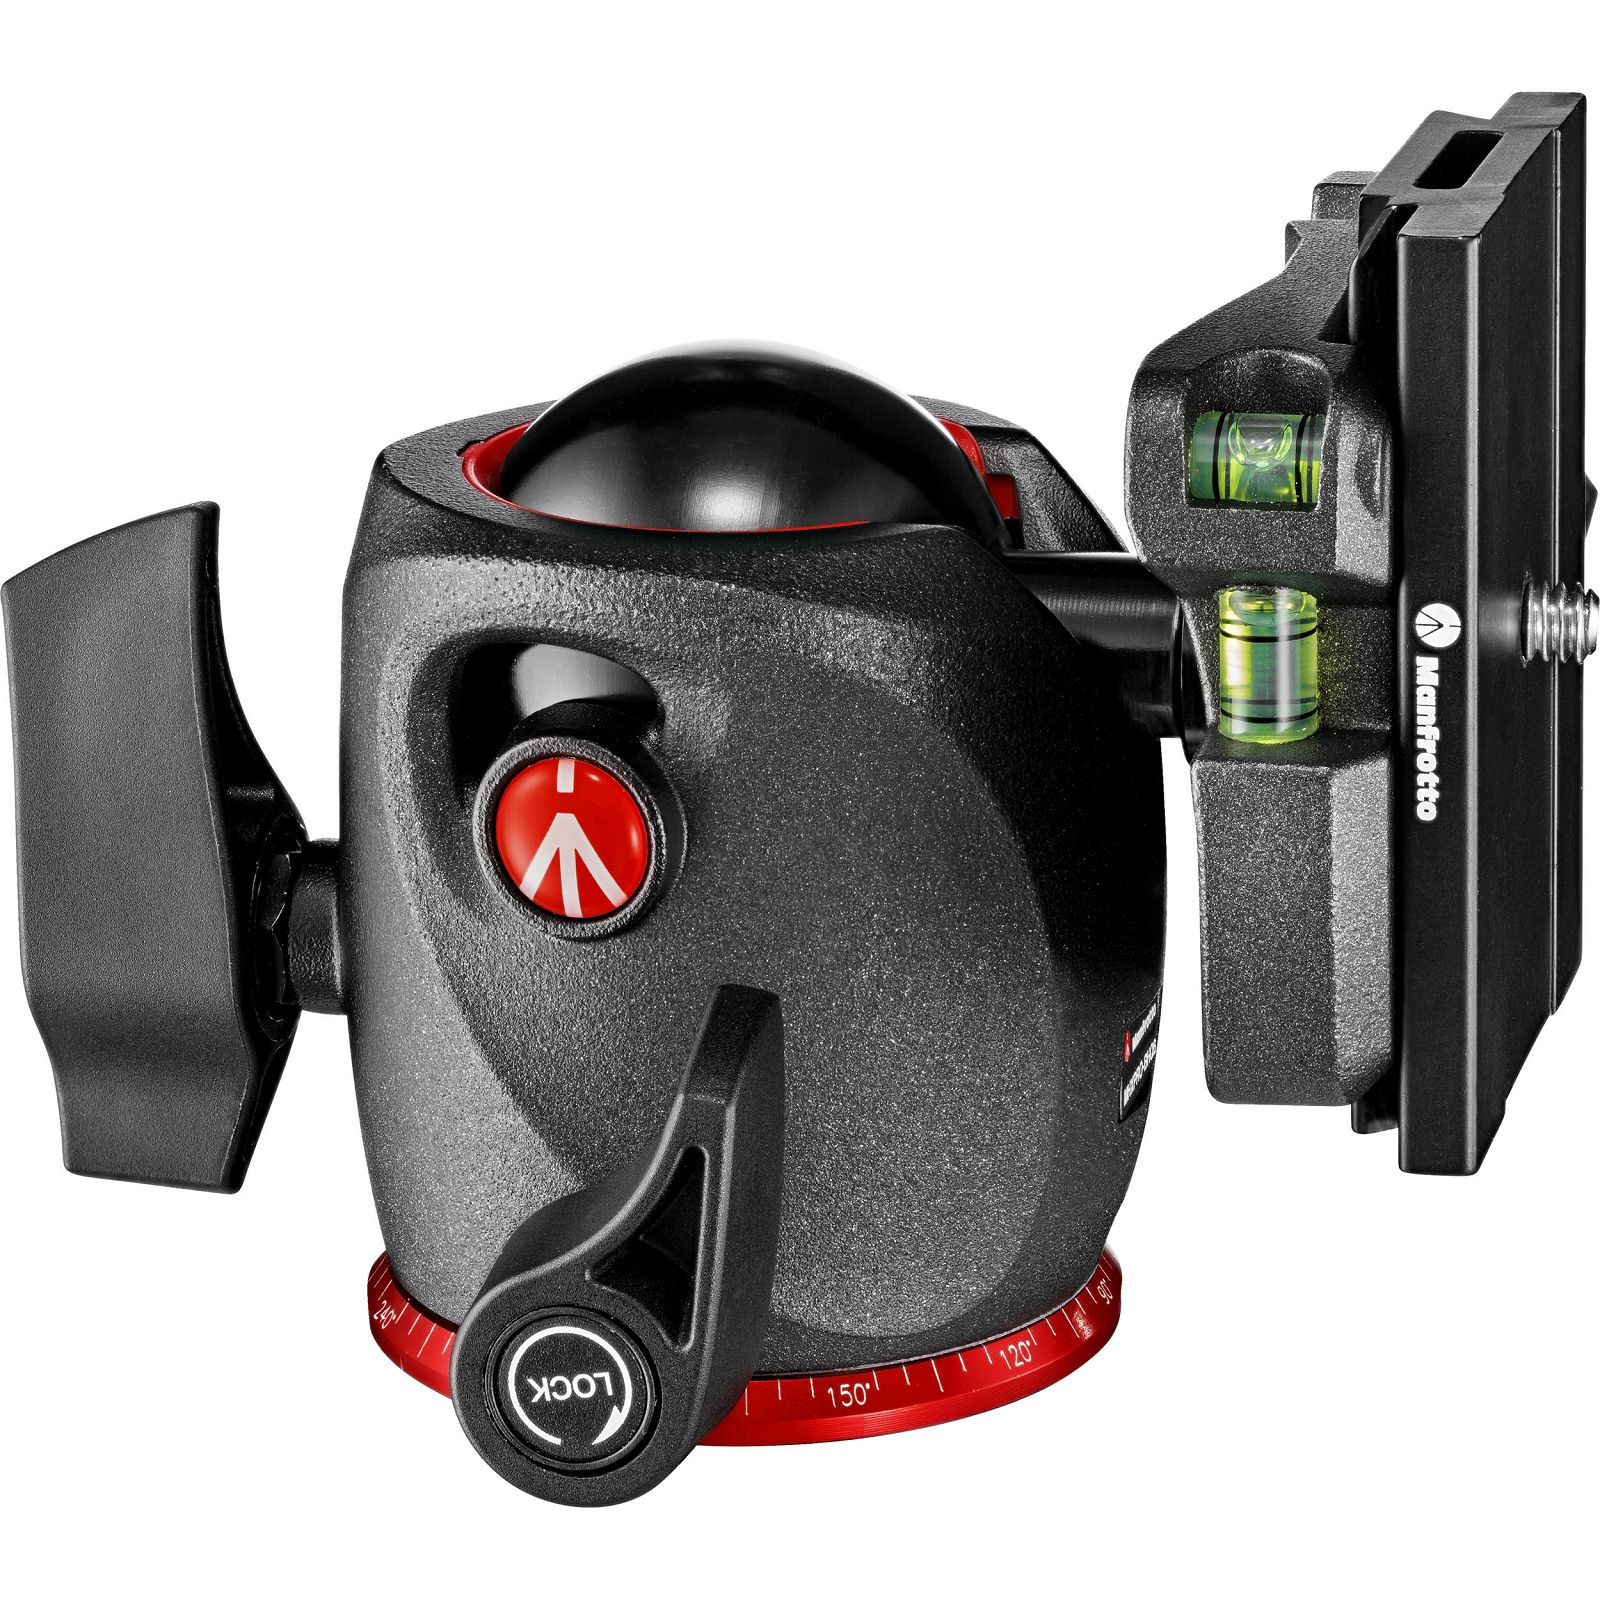 Manfrotto MHXPRO-BHQ6 10kg XPRO Ball Head with Top Lock Quick-Release System kuglasta glava s Arca-swiss pločicom